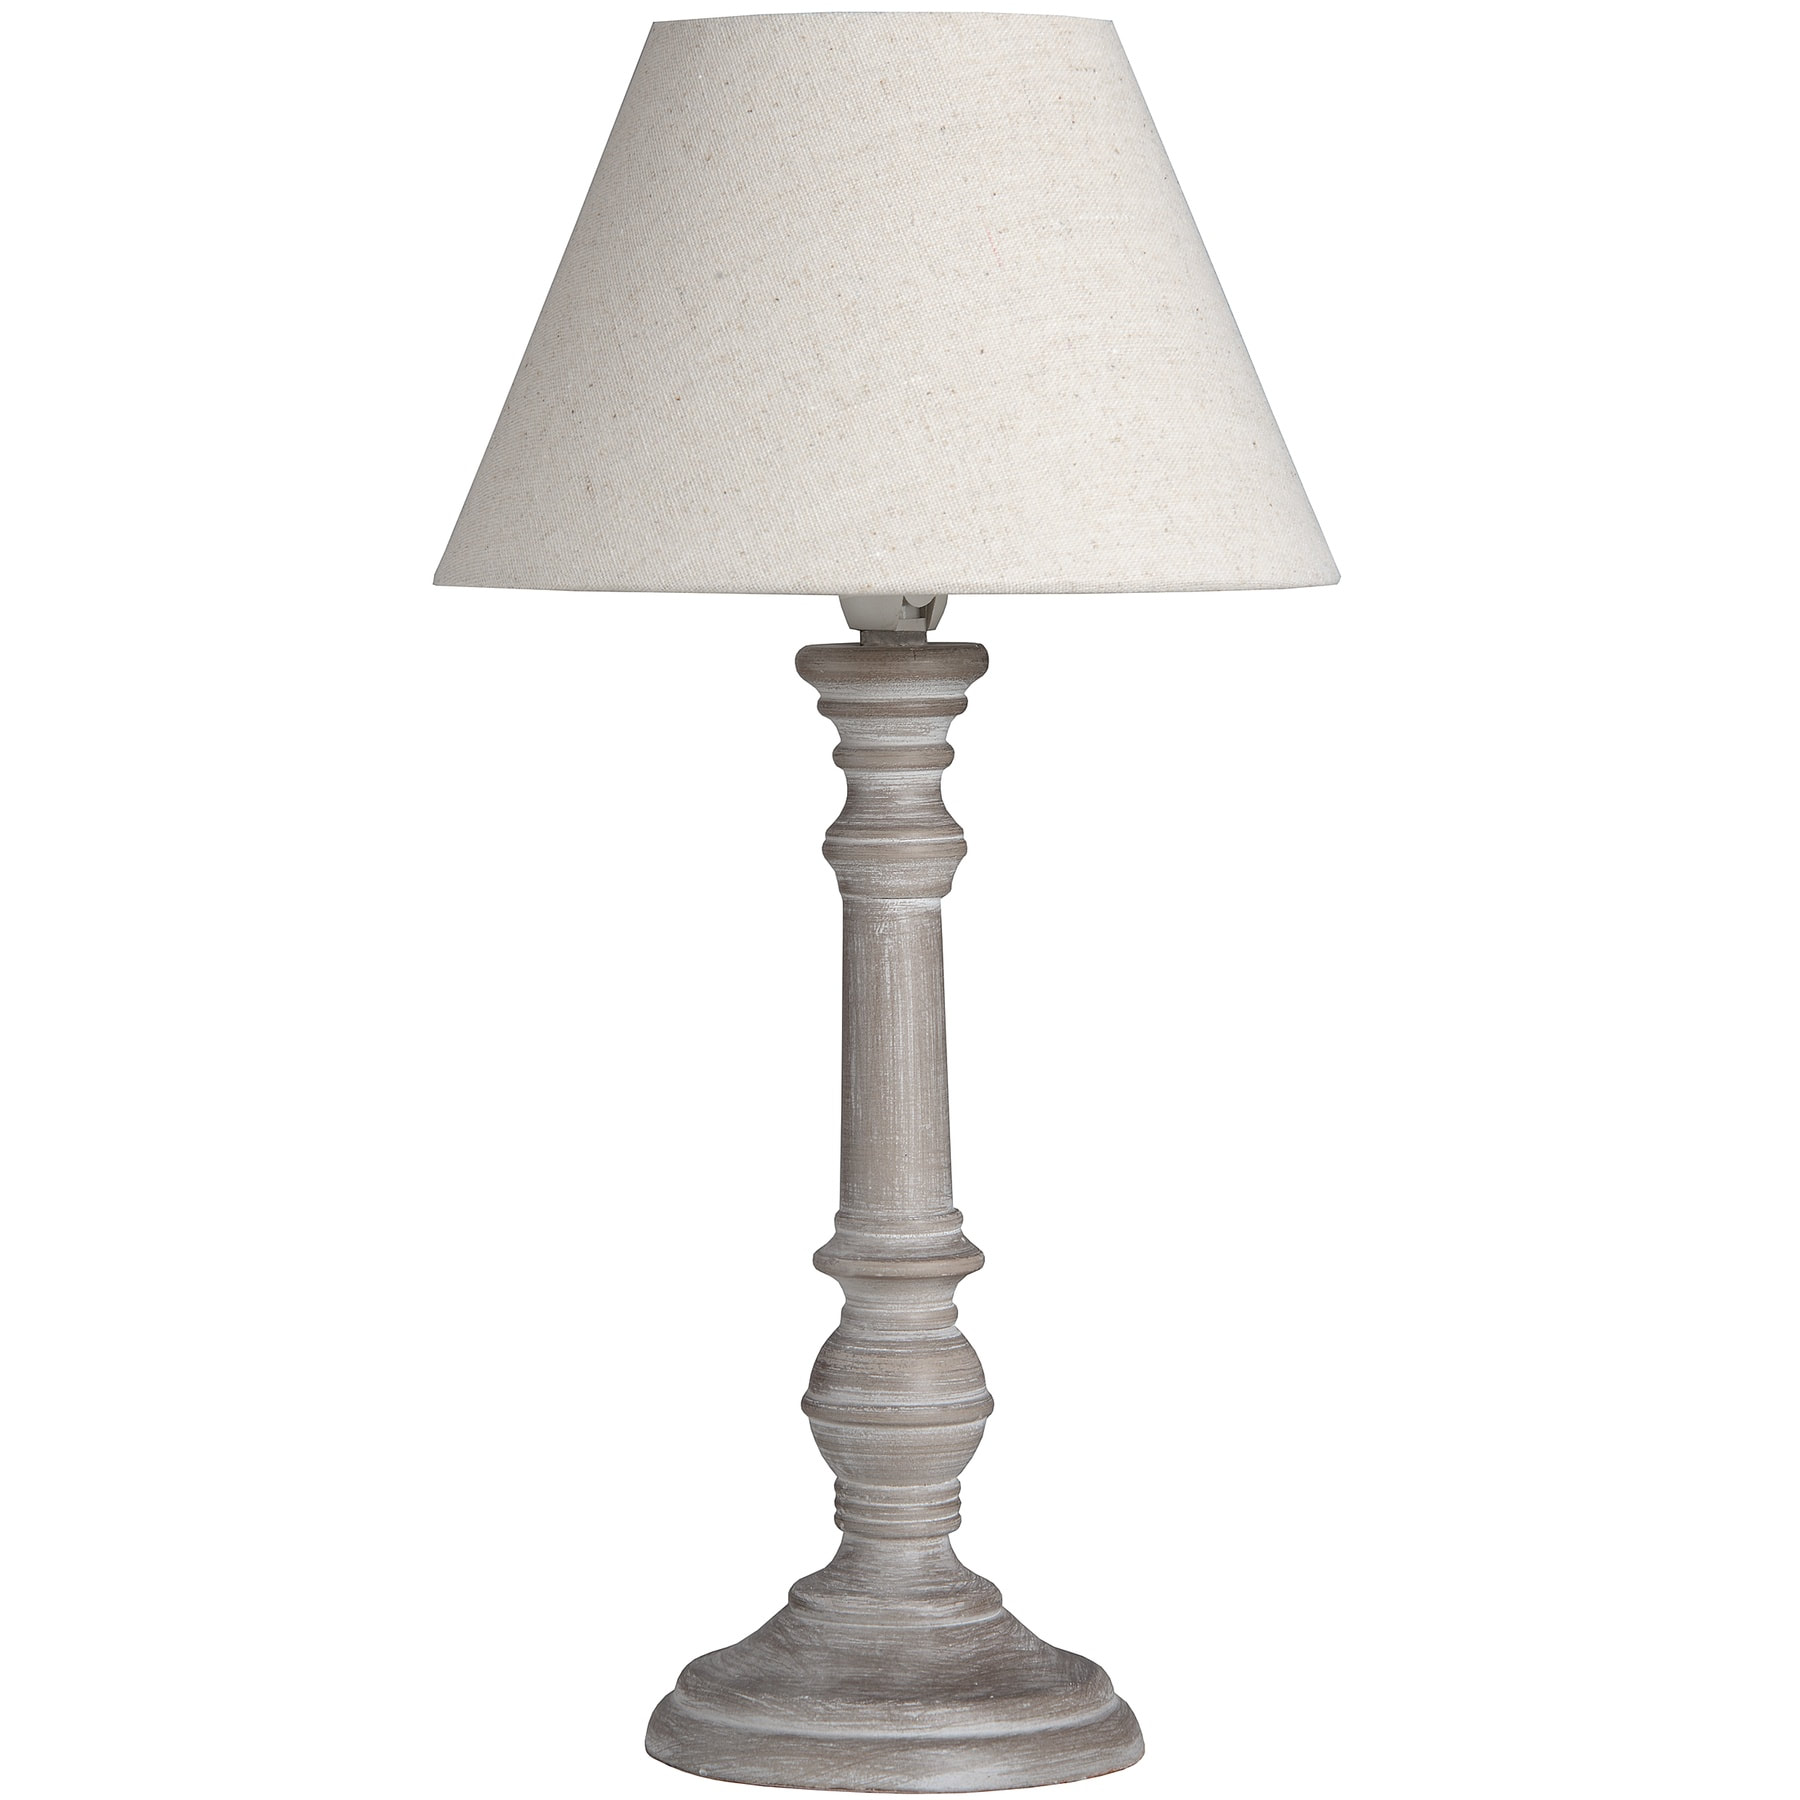 Wooden Fluted Column Table Lamps, Antique Wooden Table Lamps